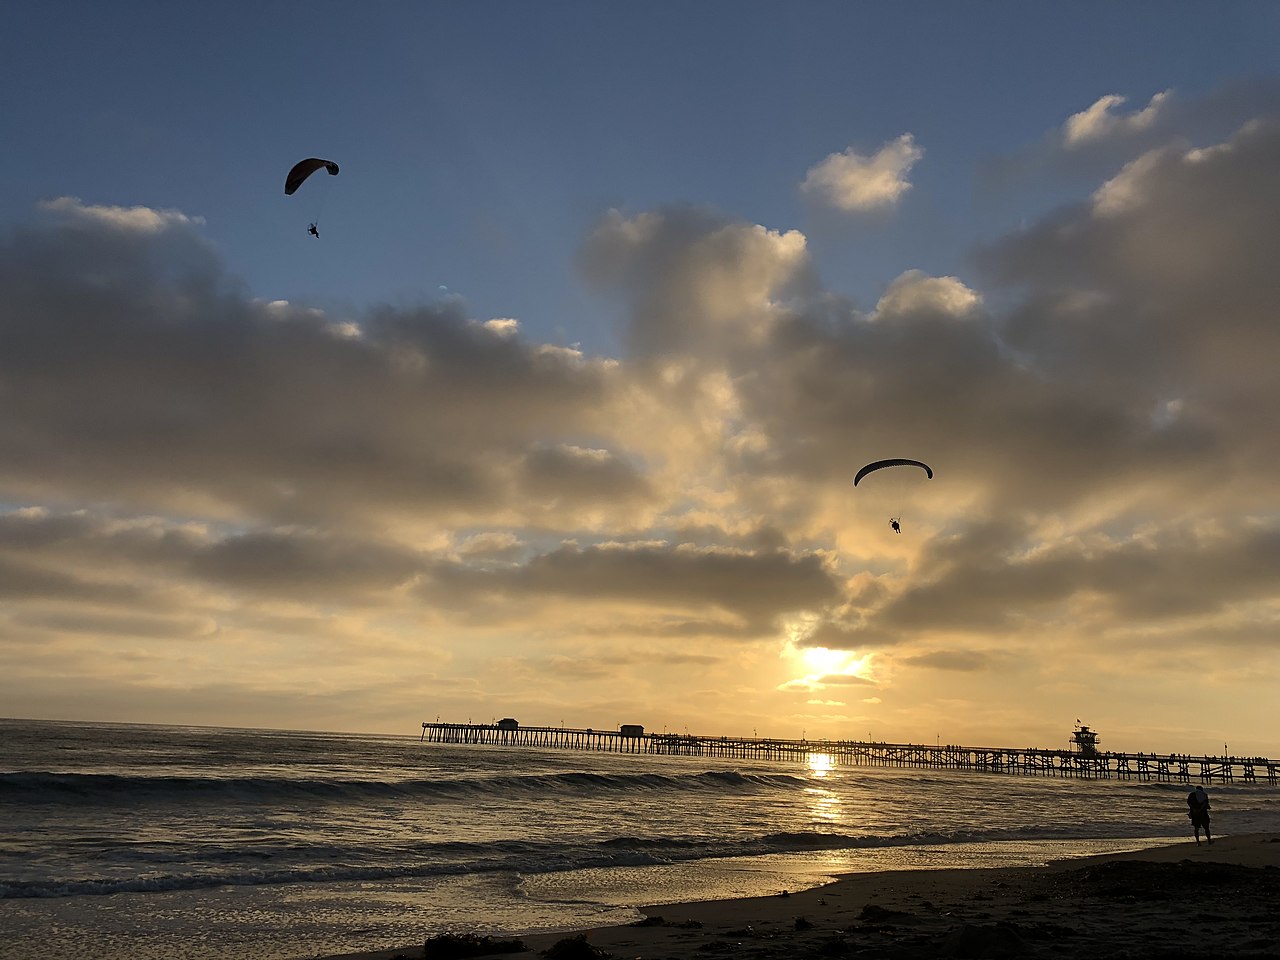 Paragliders in the air over the San Clemente Pier